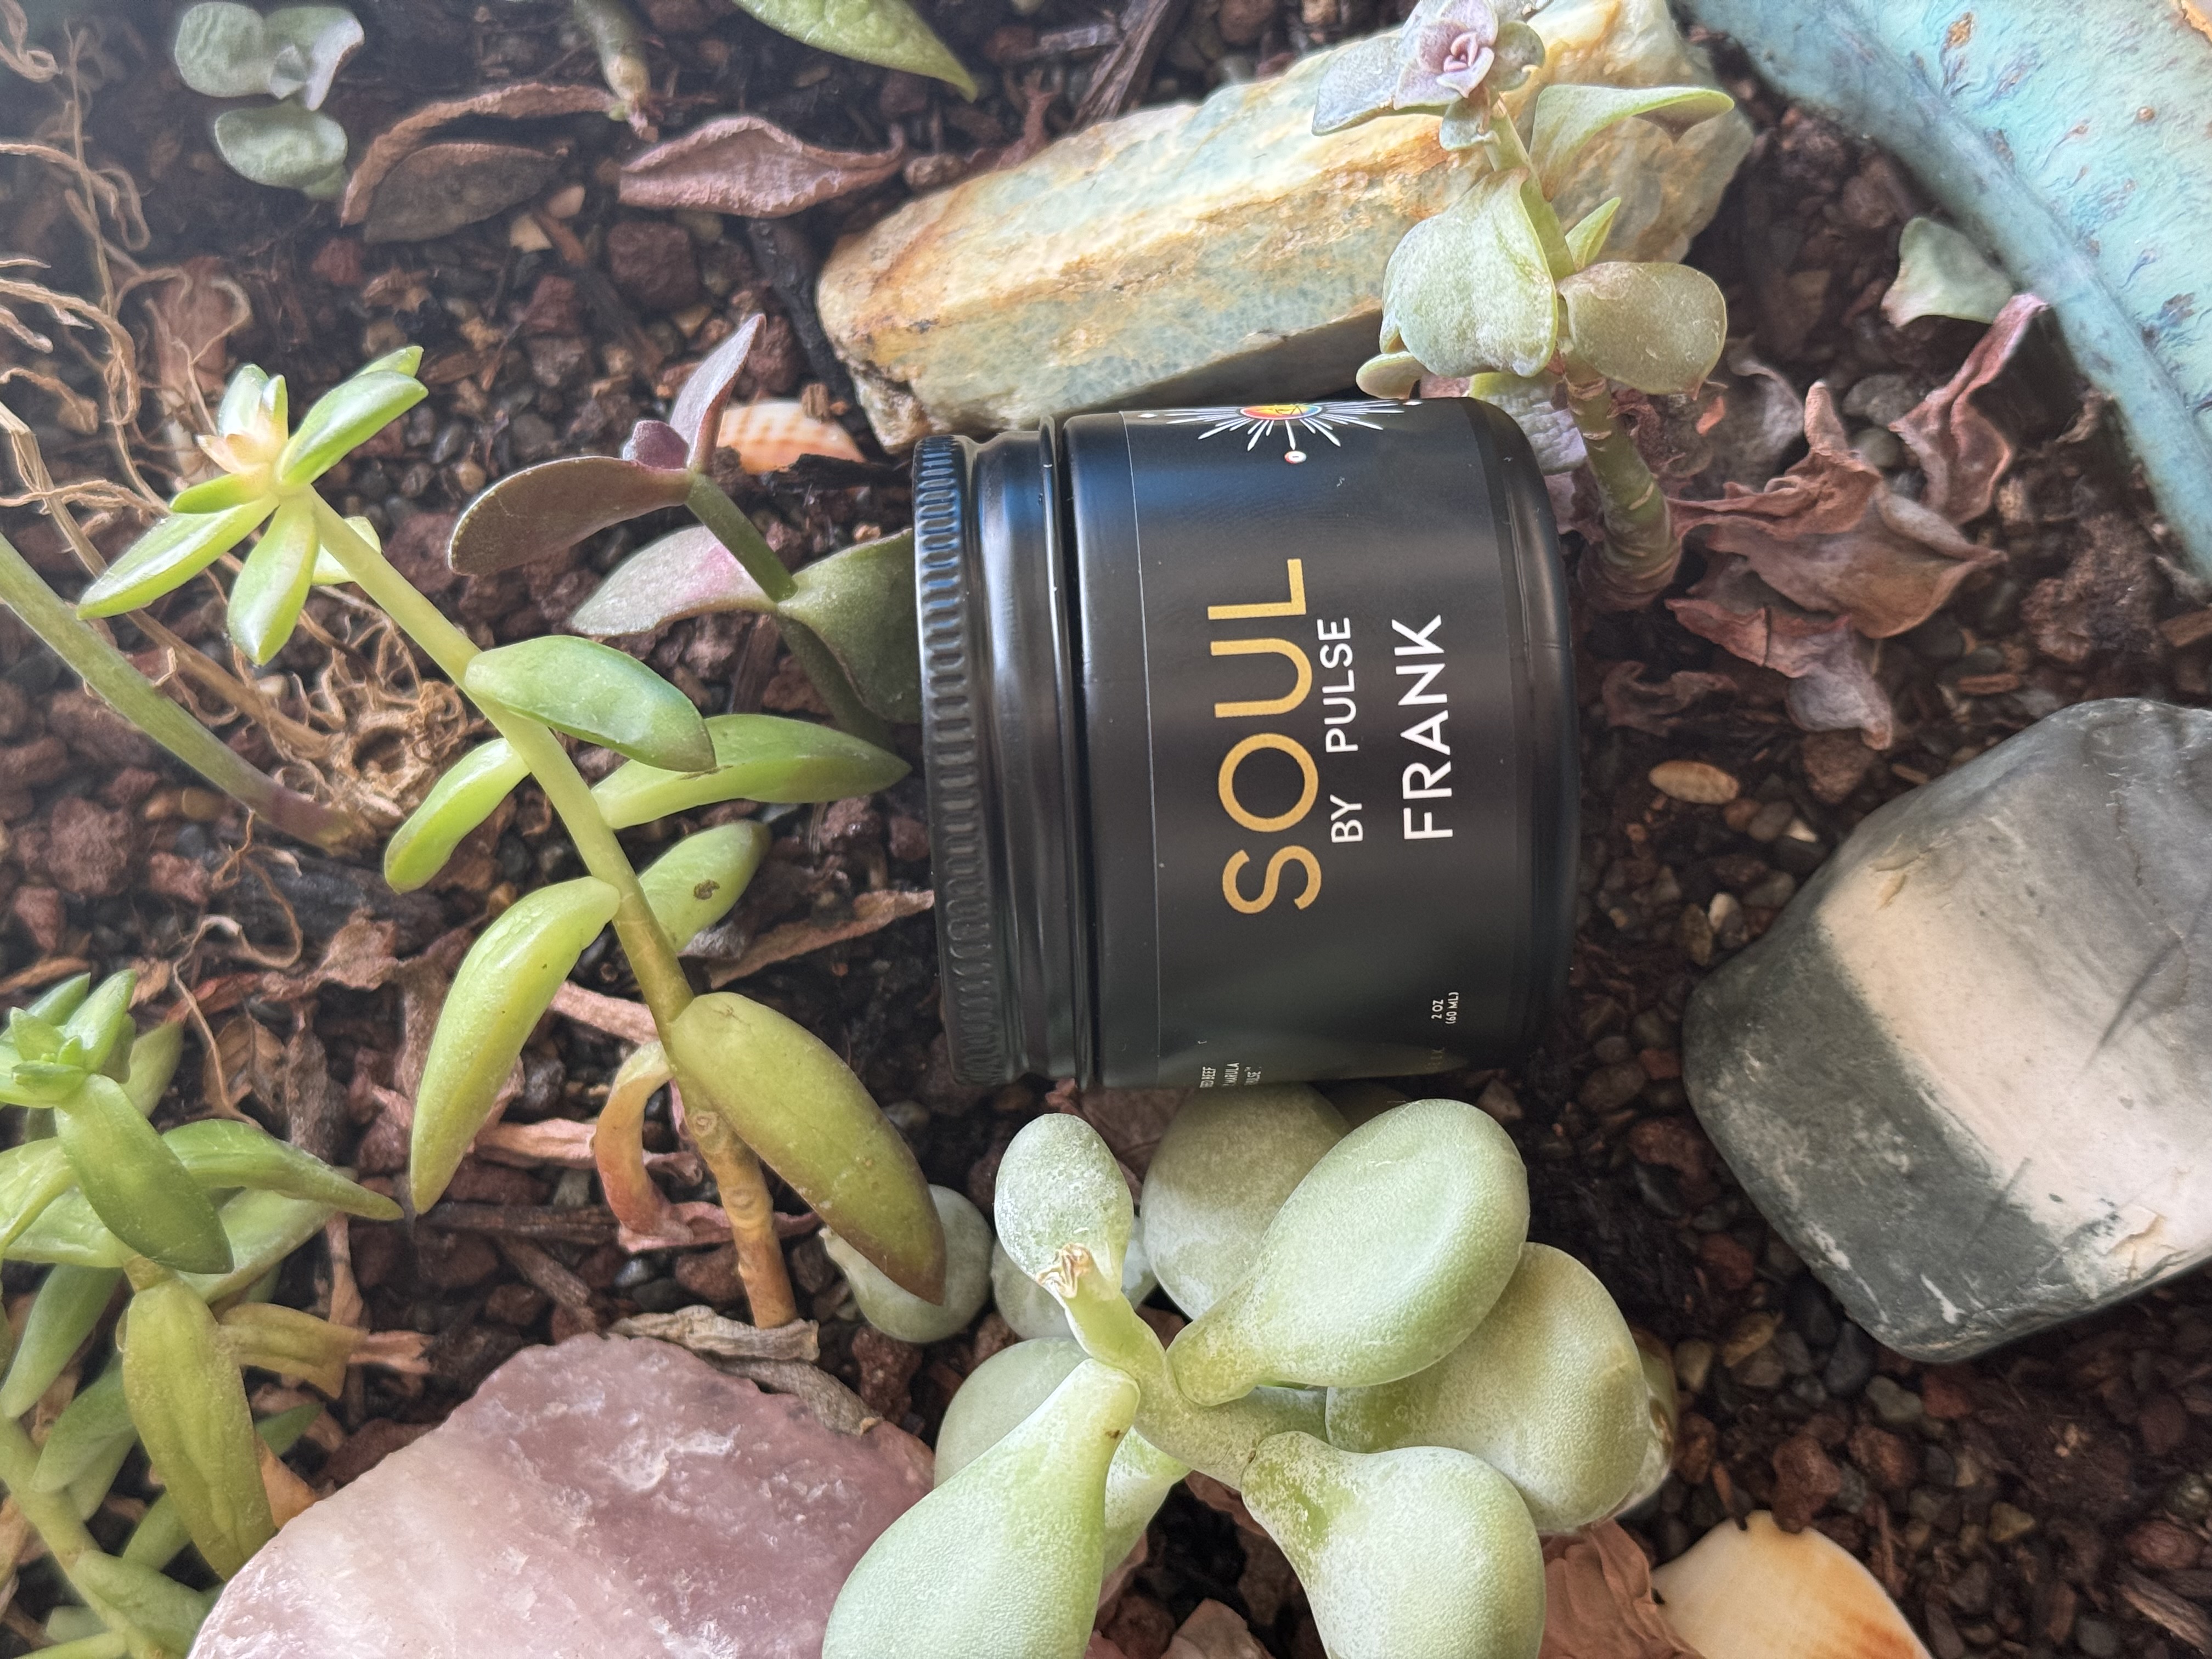 picture of pulse soul, frank scent. this is the most potent powful face and body crea It is tallow based and will natruall hyrate, fight fine liines and wrinkles, boost skin elasticity and give you that awesome tallow glow